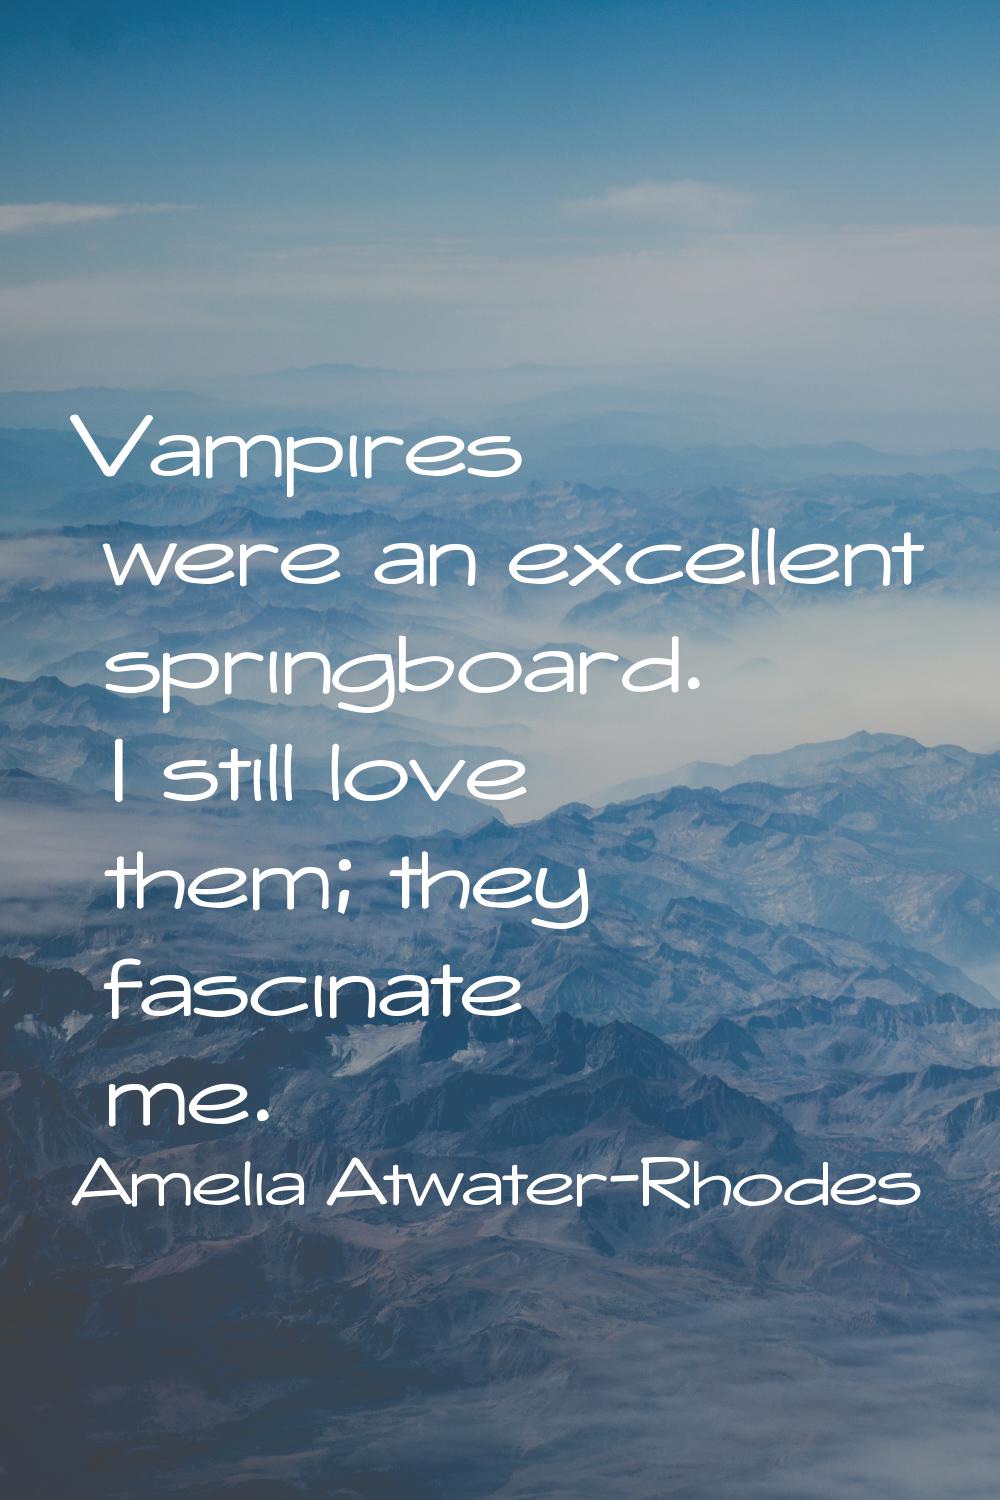 Vampires were an excellent springboard. I still love them; they fascinate me.